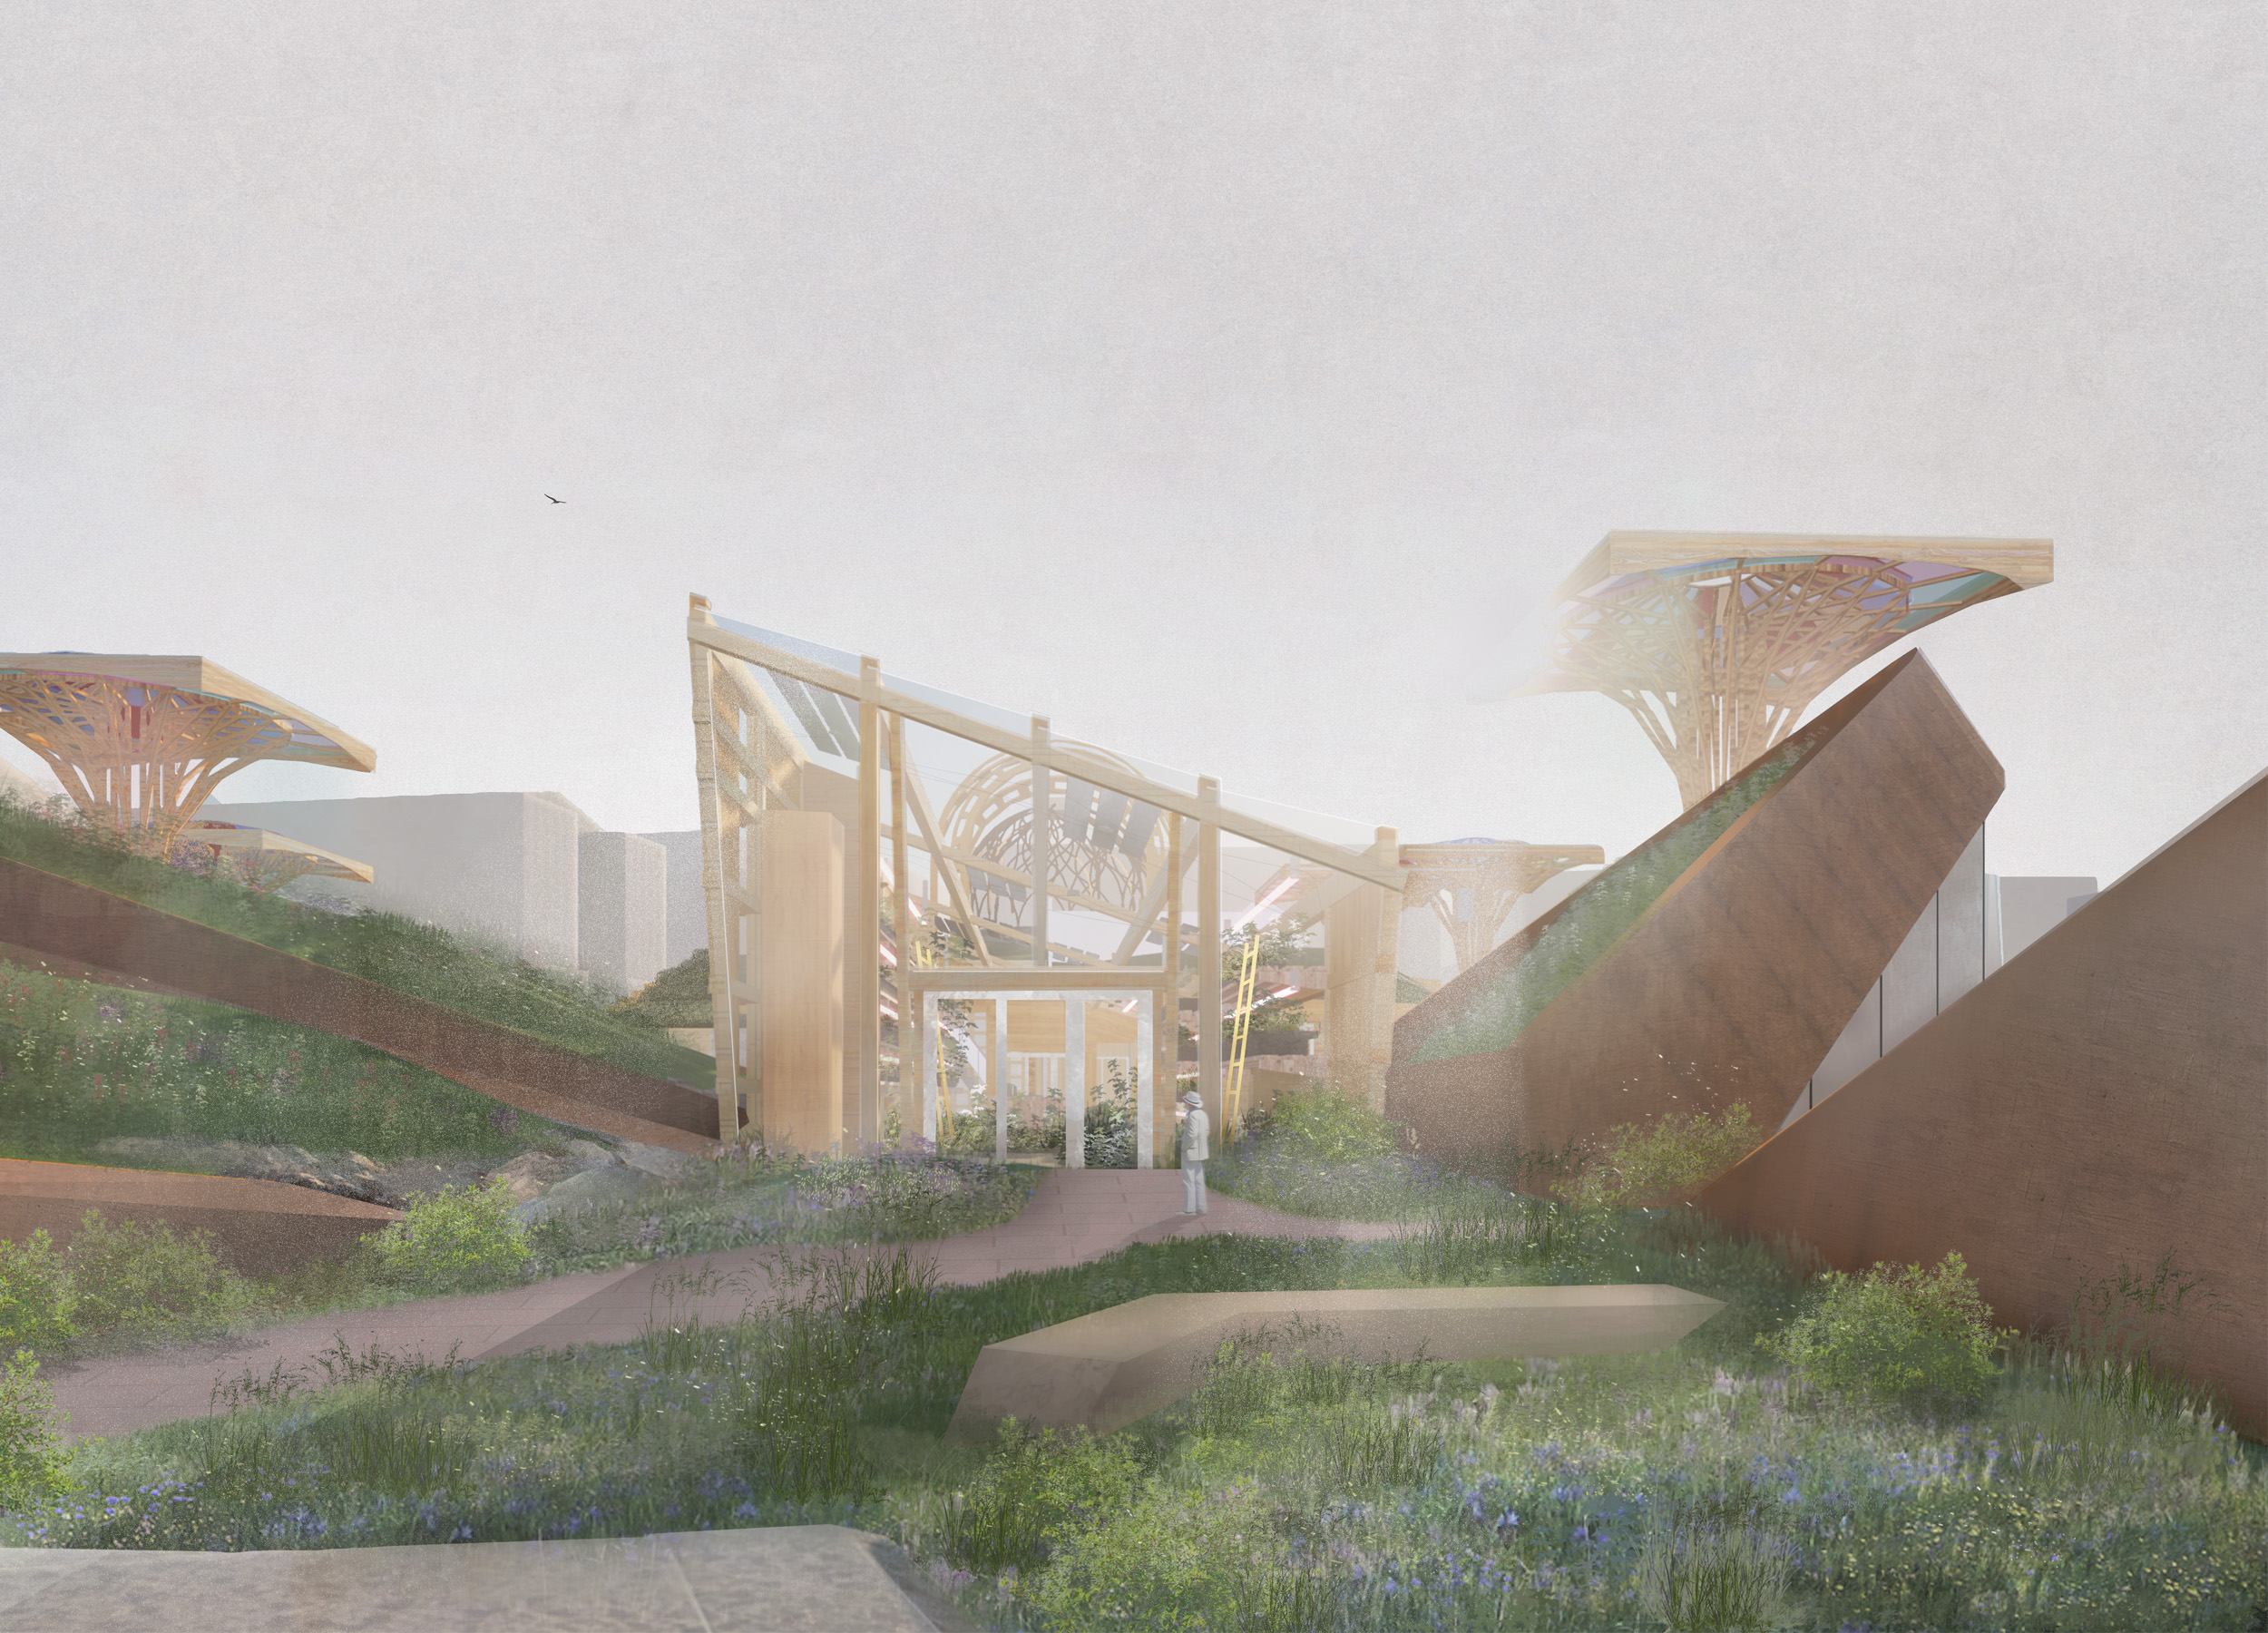 BA Architecture work by Caitlin Meier showing a render of the entrance of a building surrounded by greenery.